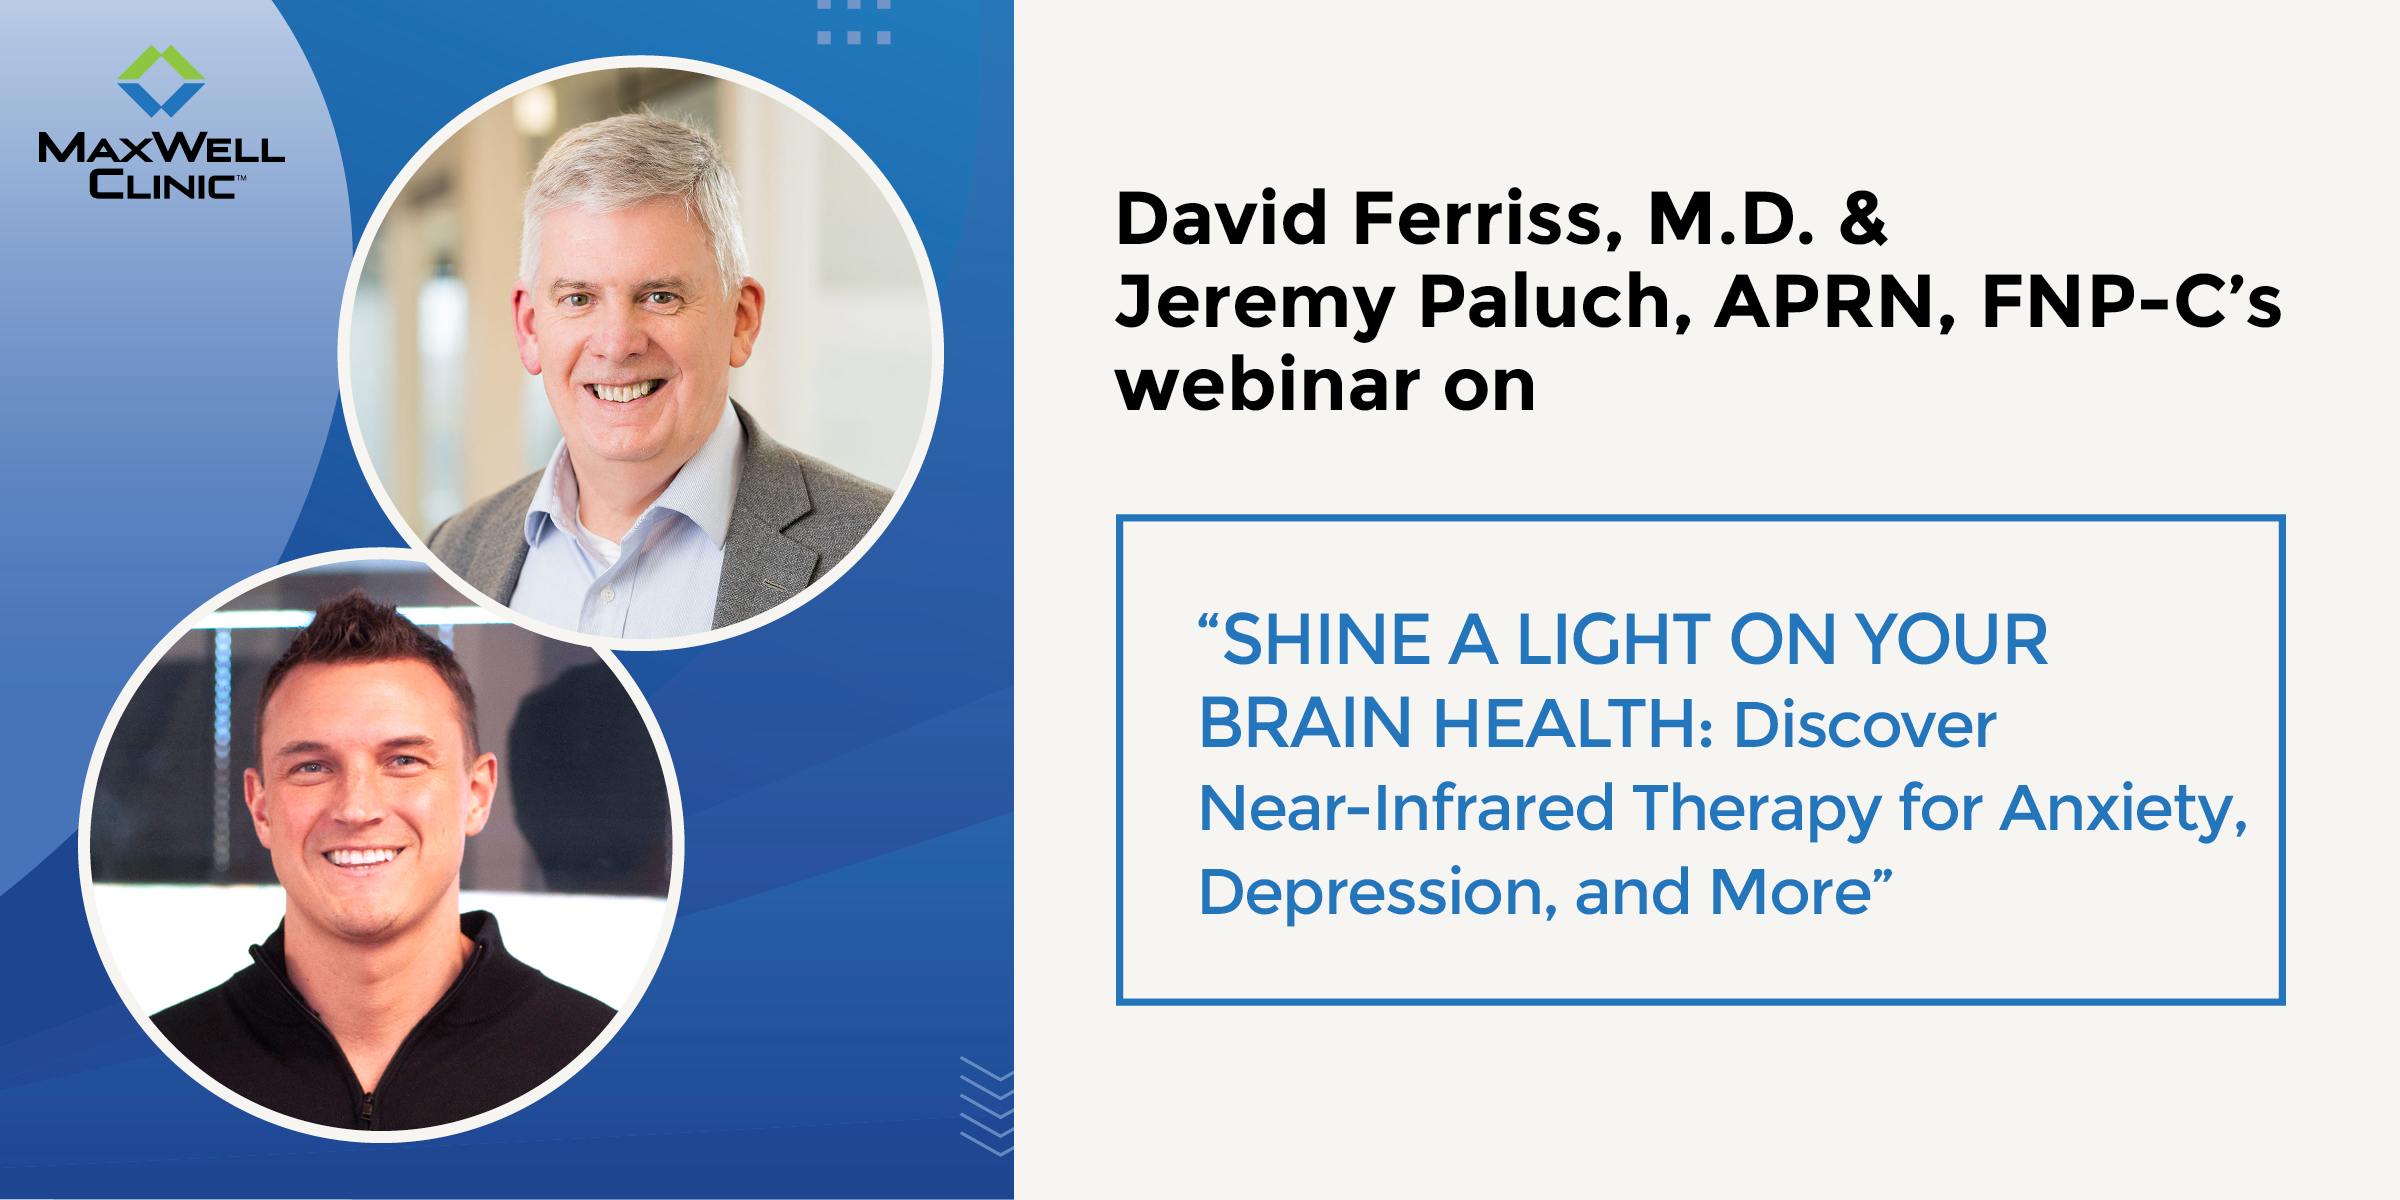 Shine a Light on Your Brain Health: Discover Near-Infrared Therapy for Anxiety, Depression, and More